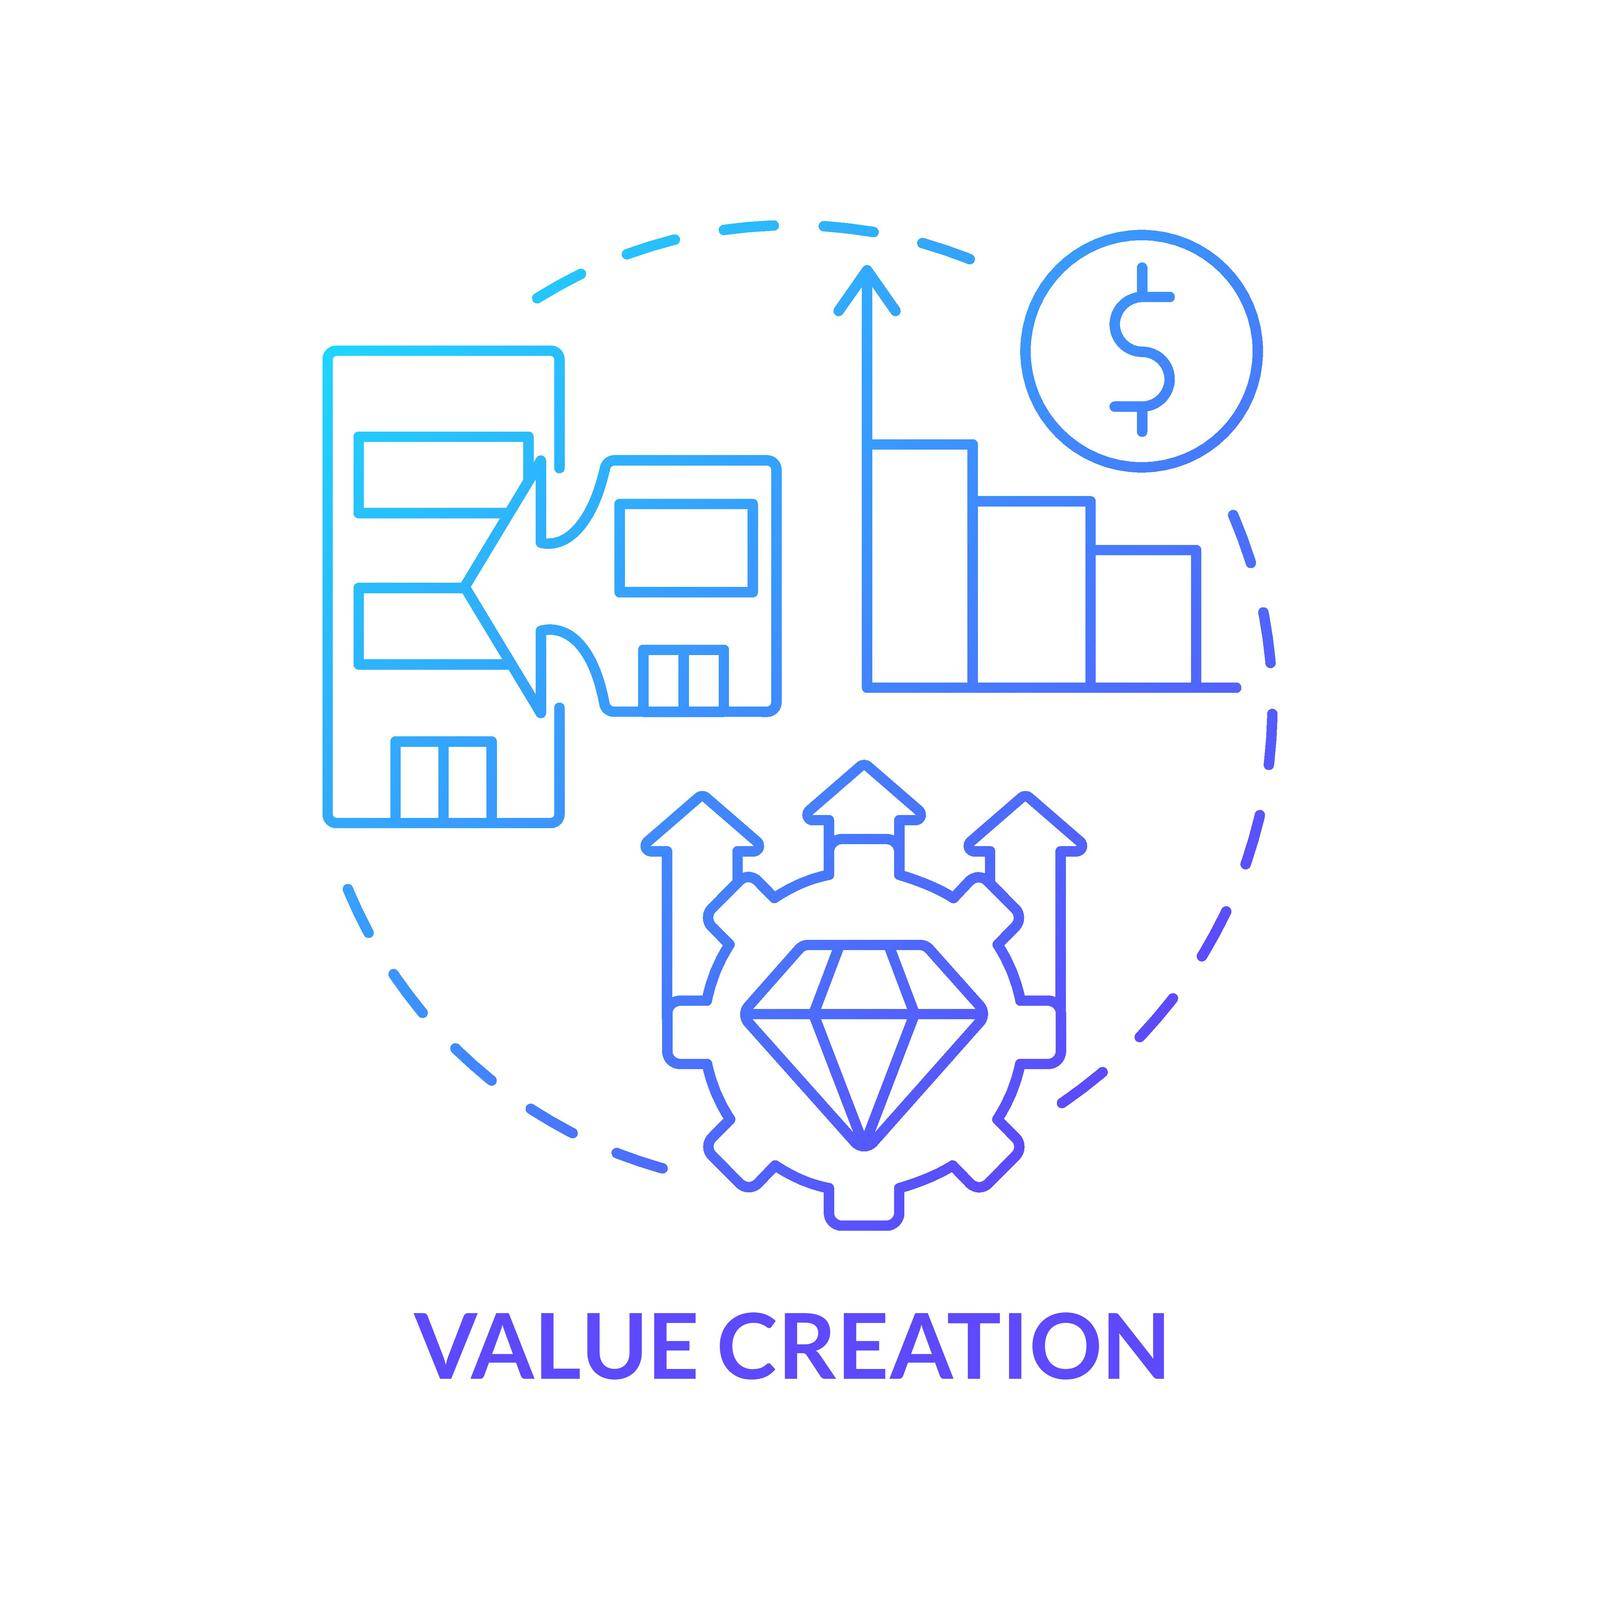 Value creation blue gradient concept icon by bsd